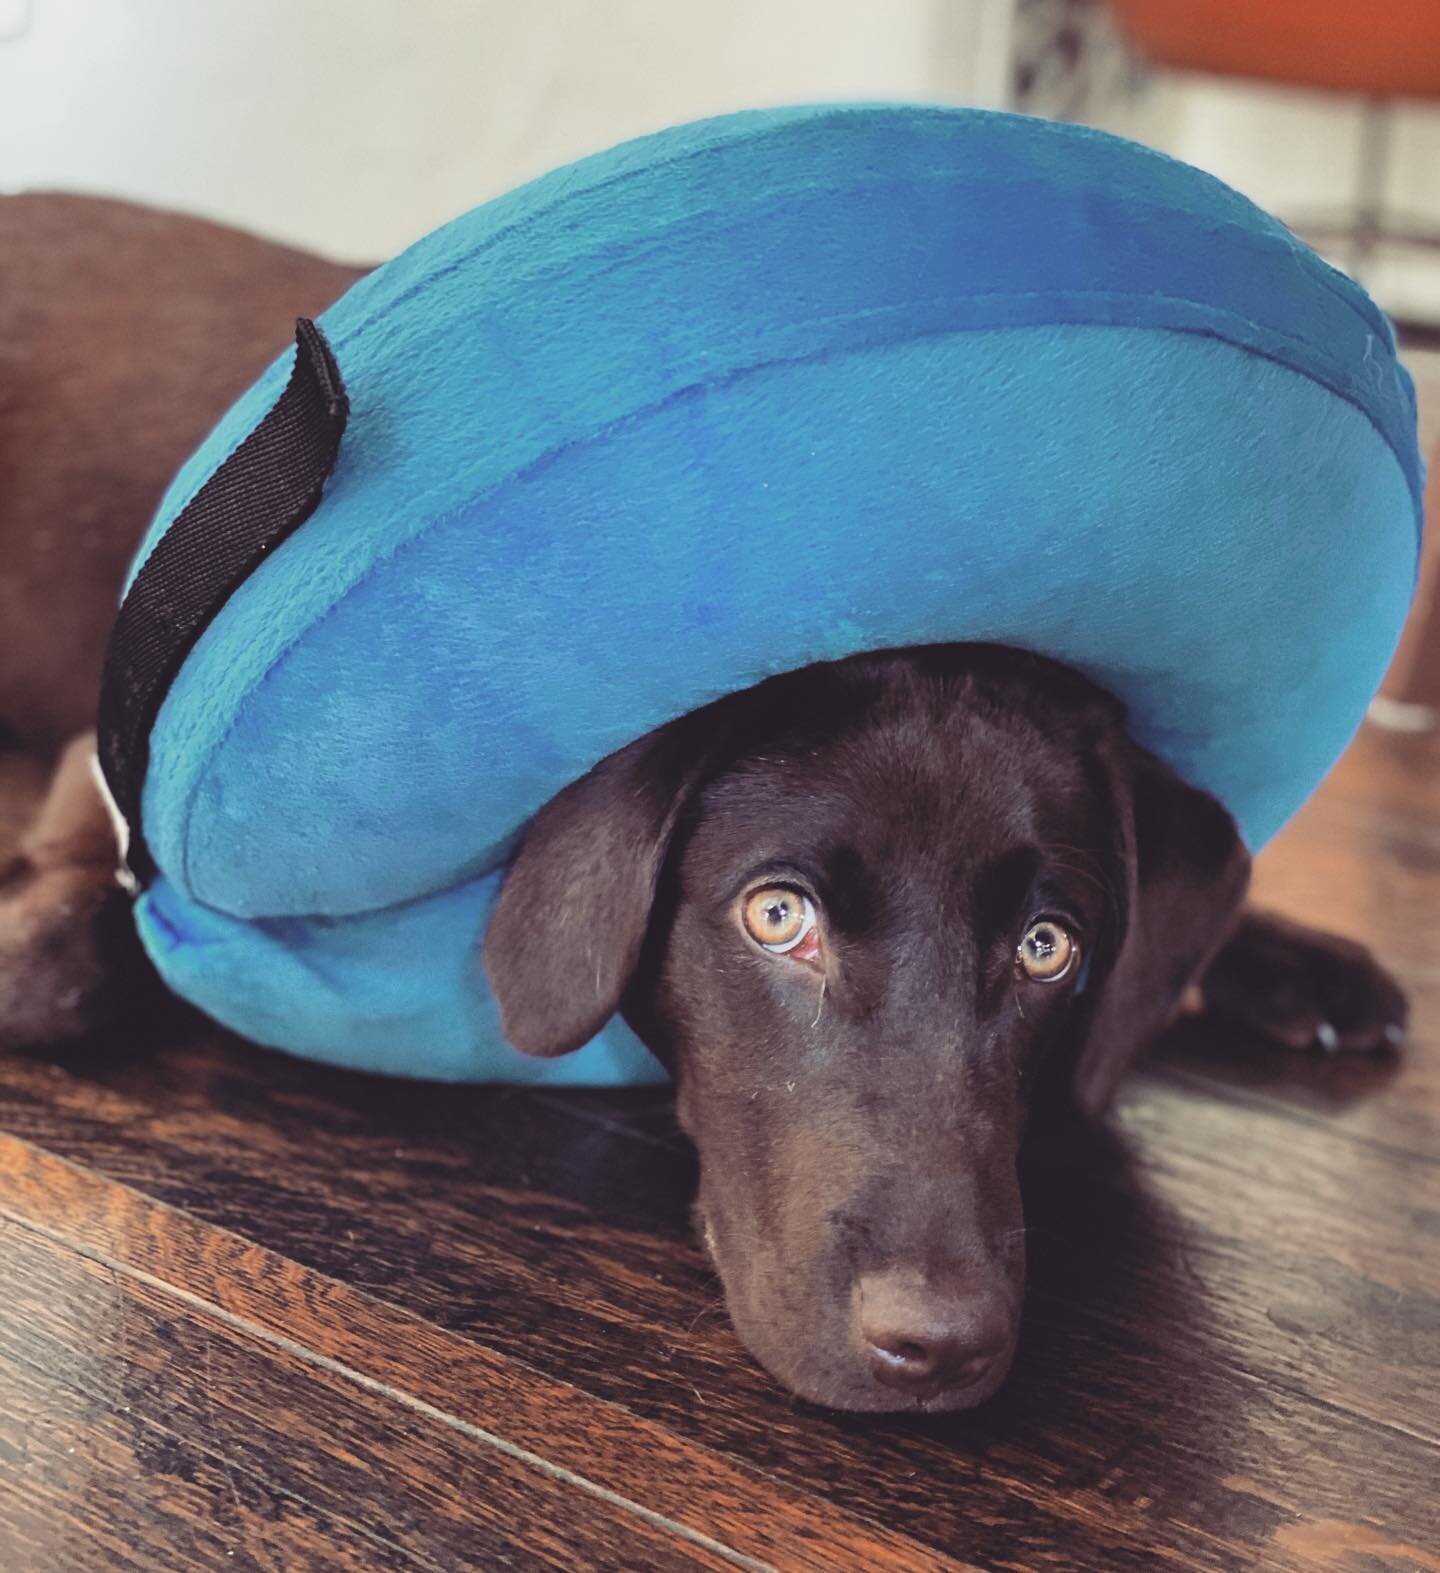 sweet little thing had her &lsquo;surgery&rsquo; yesterday ... #ouchie #coneofshame #chocolatelabs #spayed #sweetbabygirl #woofwoof #🙊 #🐶#😢 #polly #twodads #dogdads